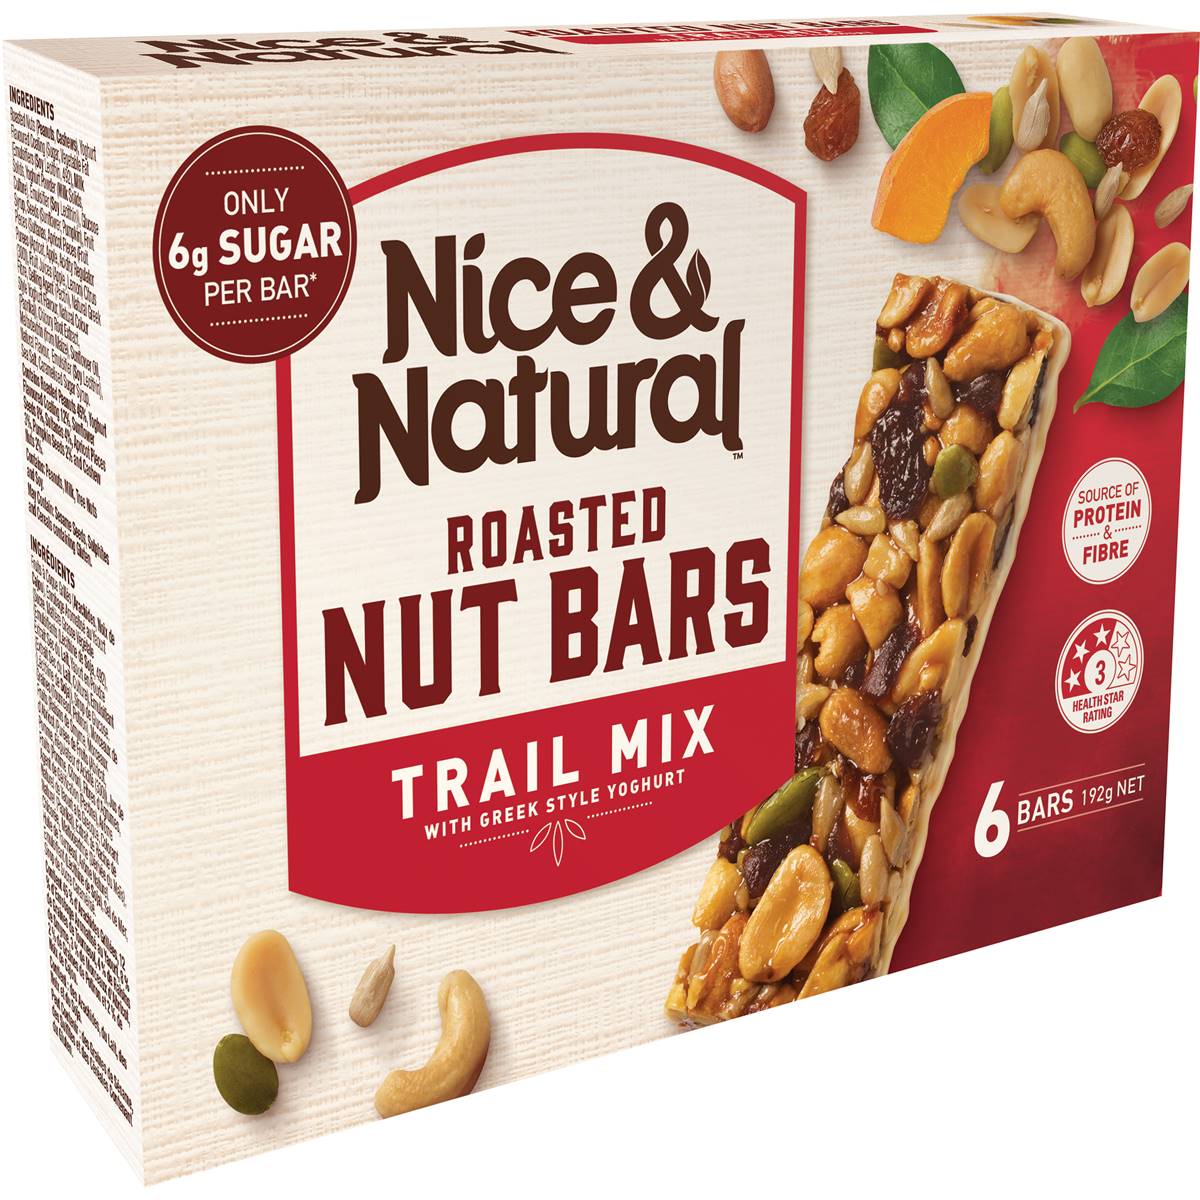 Nice & Natural Roasted Nut Bars Trail Mix 6 bars 192g